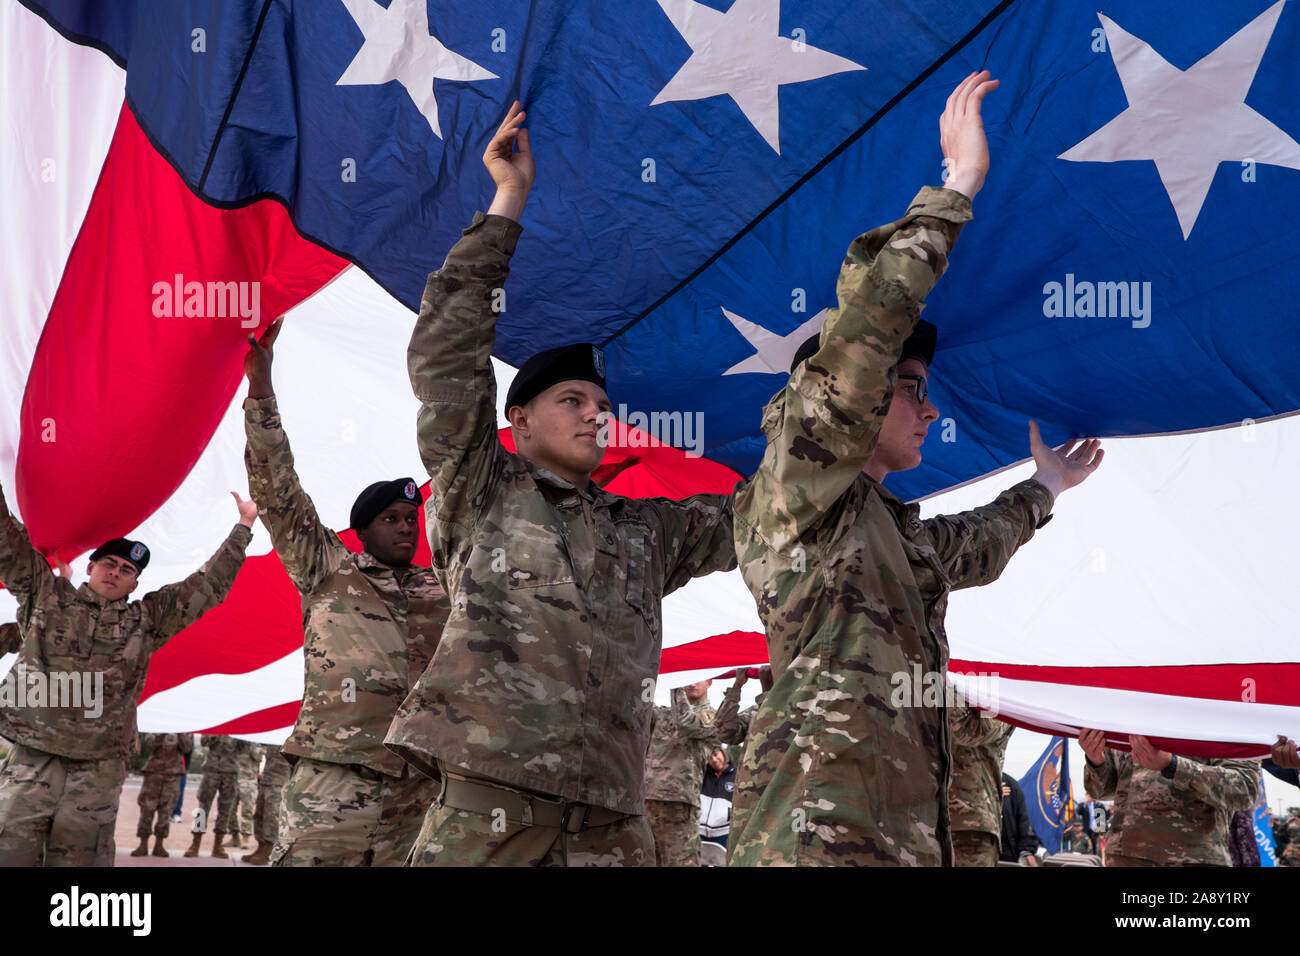 El Paso, Texas, USA. 11th Nov, 2019. Soldiers of 1st Battalion, 77th Armor Regiment, 3rd Armored Brigade Combat Team ''Bulldog'', 1st Armored Division, carry an American flag during a Veteran's Day celebration in El Paso, Texas. Credit: Joel Angel Juarez/ZUMA Wire/Alamy Live News Stock Photo